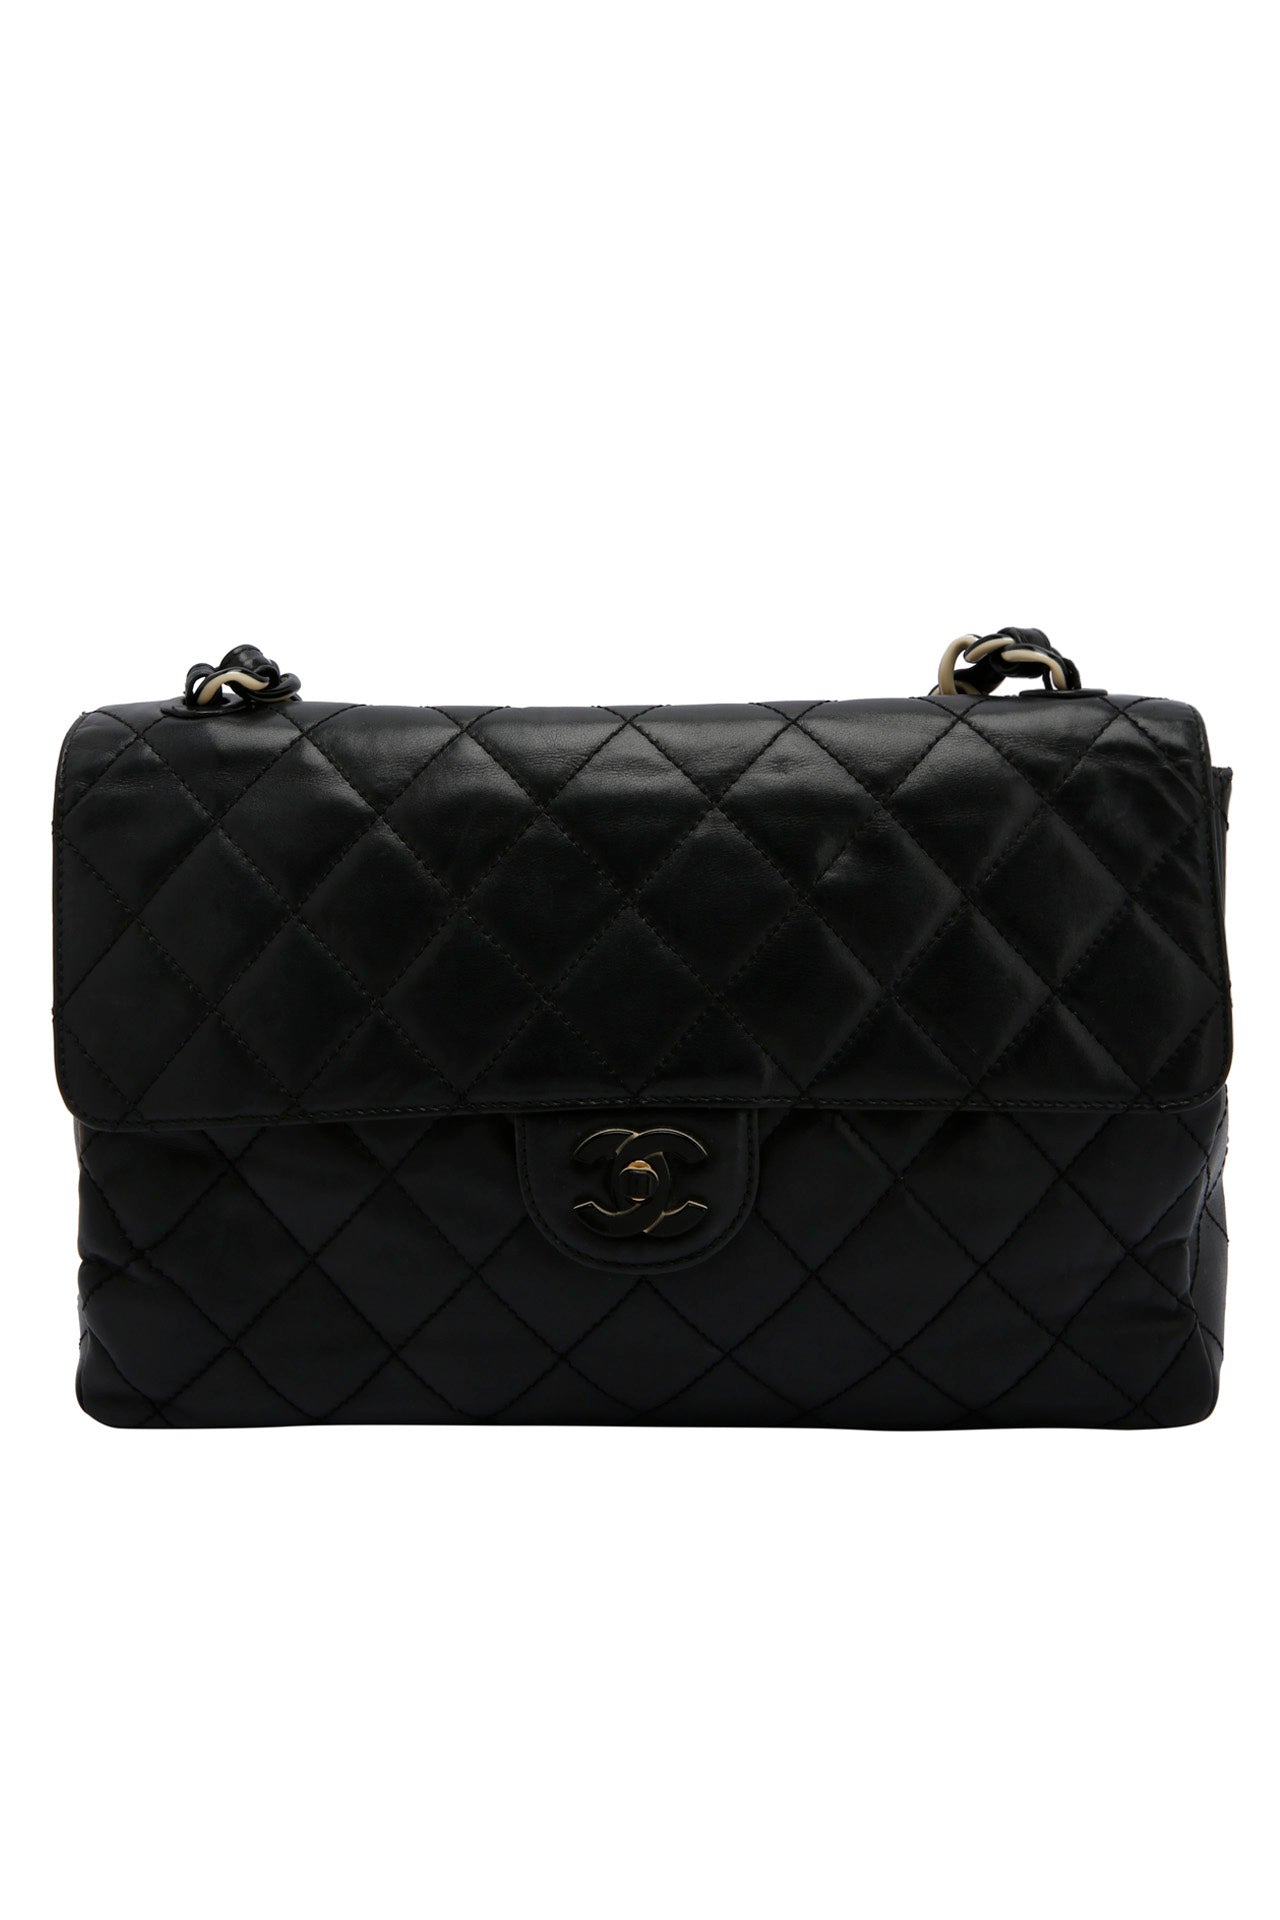 Chanel Black Quilted Calfskin Leather Jumbo Classic Single Flap Bag